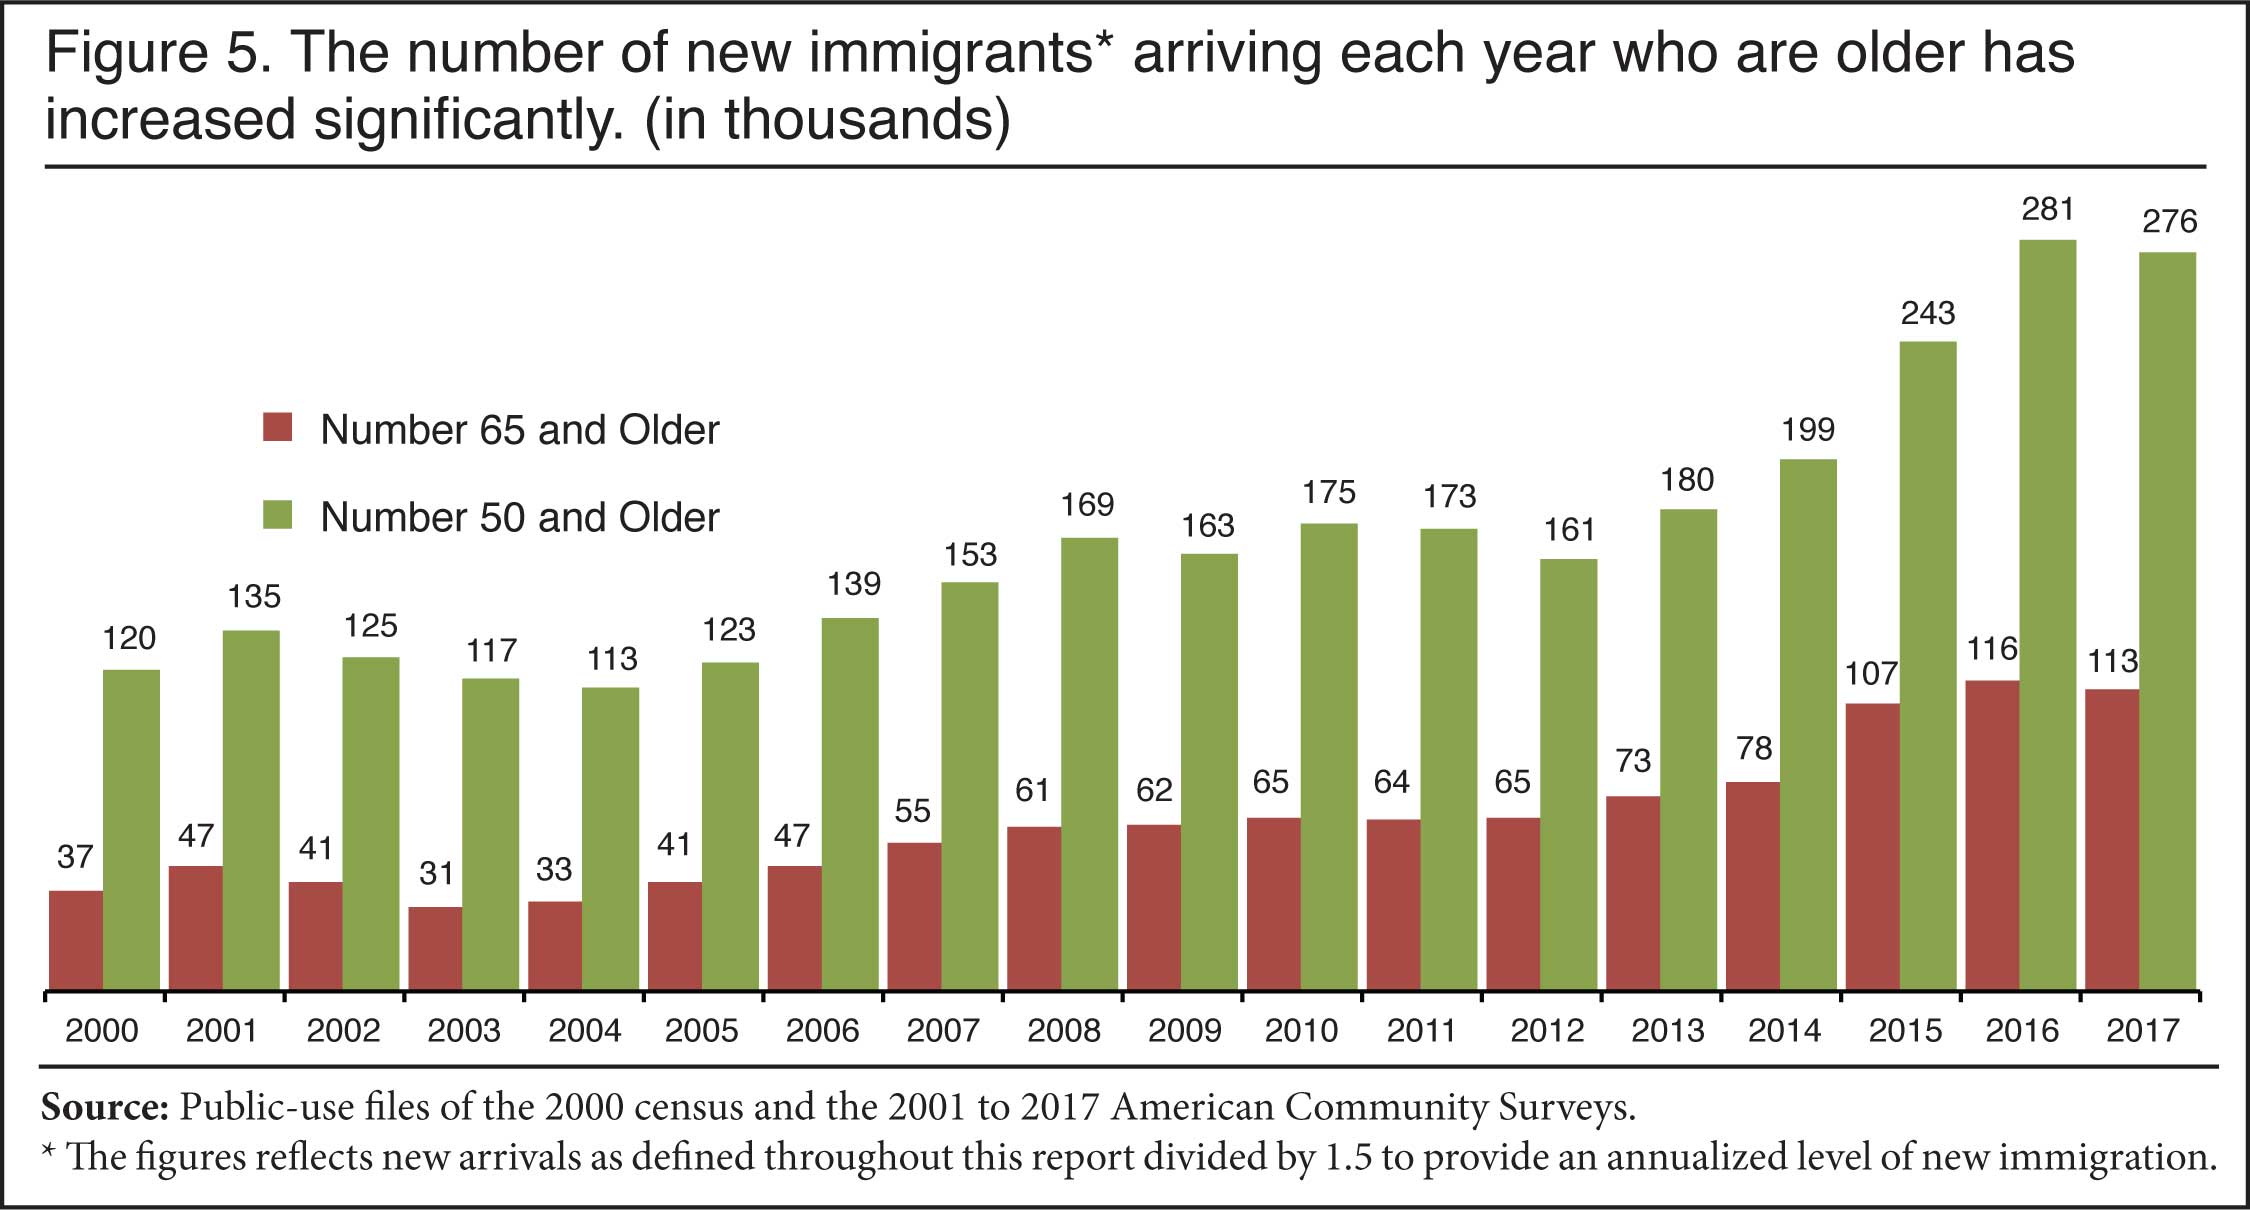 Graph: The number of new immigrants arriving each year who are older has increased significantly 